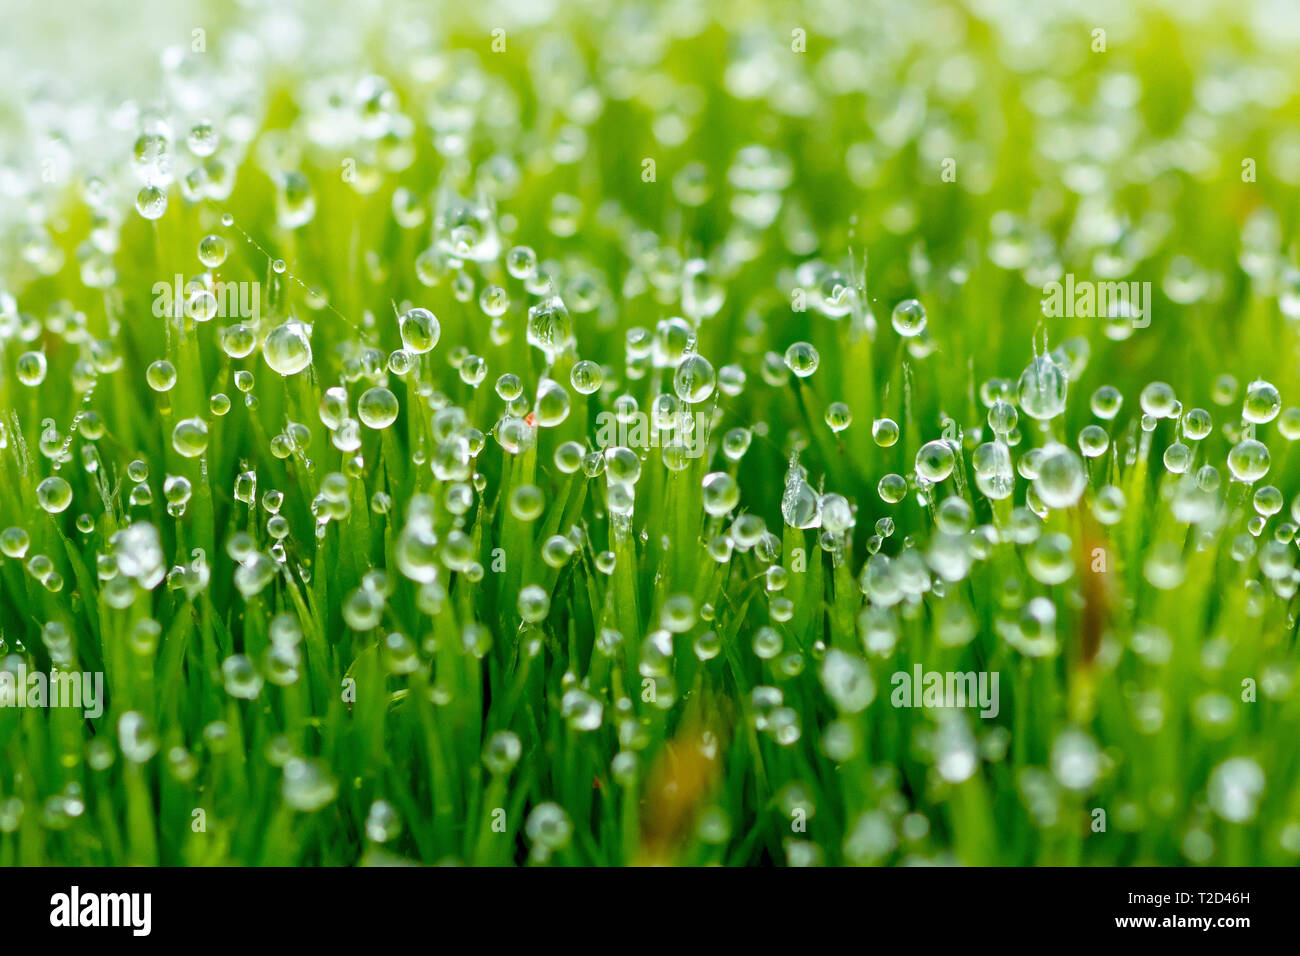 Dewdrops condense on moss on a foggy day, with low depth of field. Stock Photo